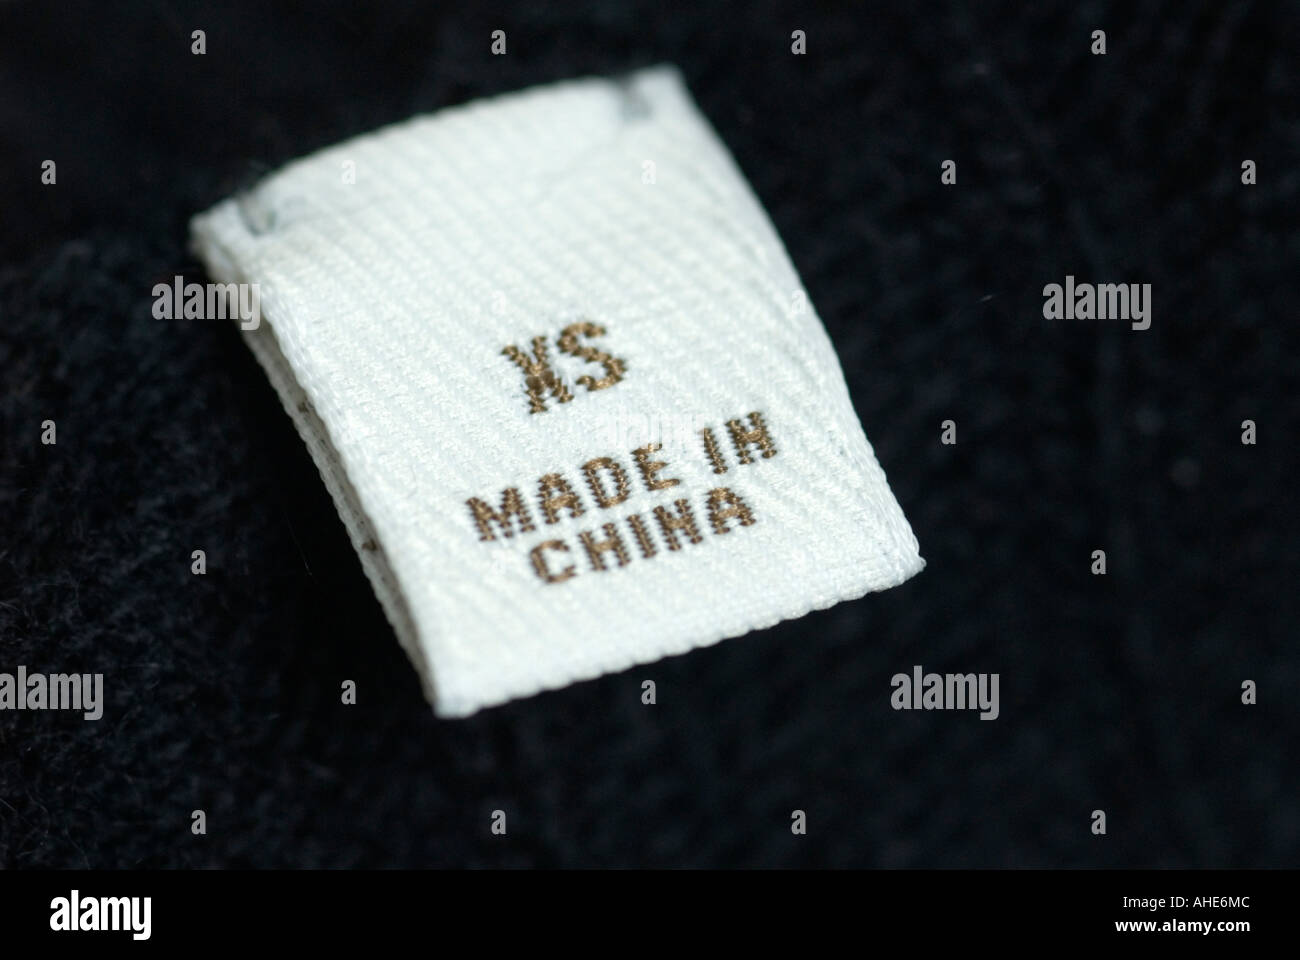 Detail of clothes label indicating that garment was Made in China Stock Photo